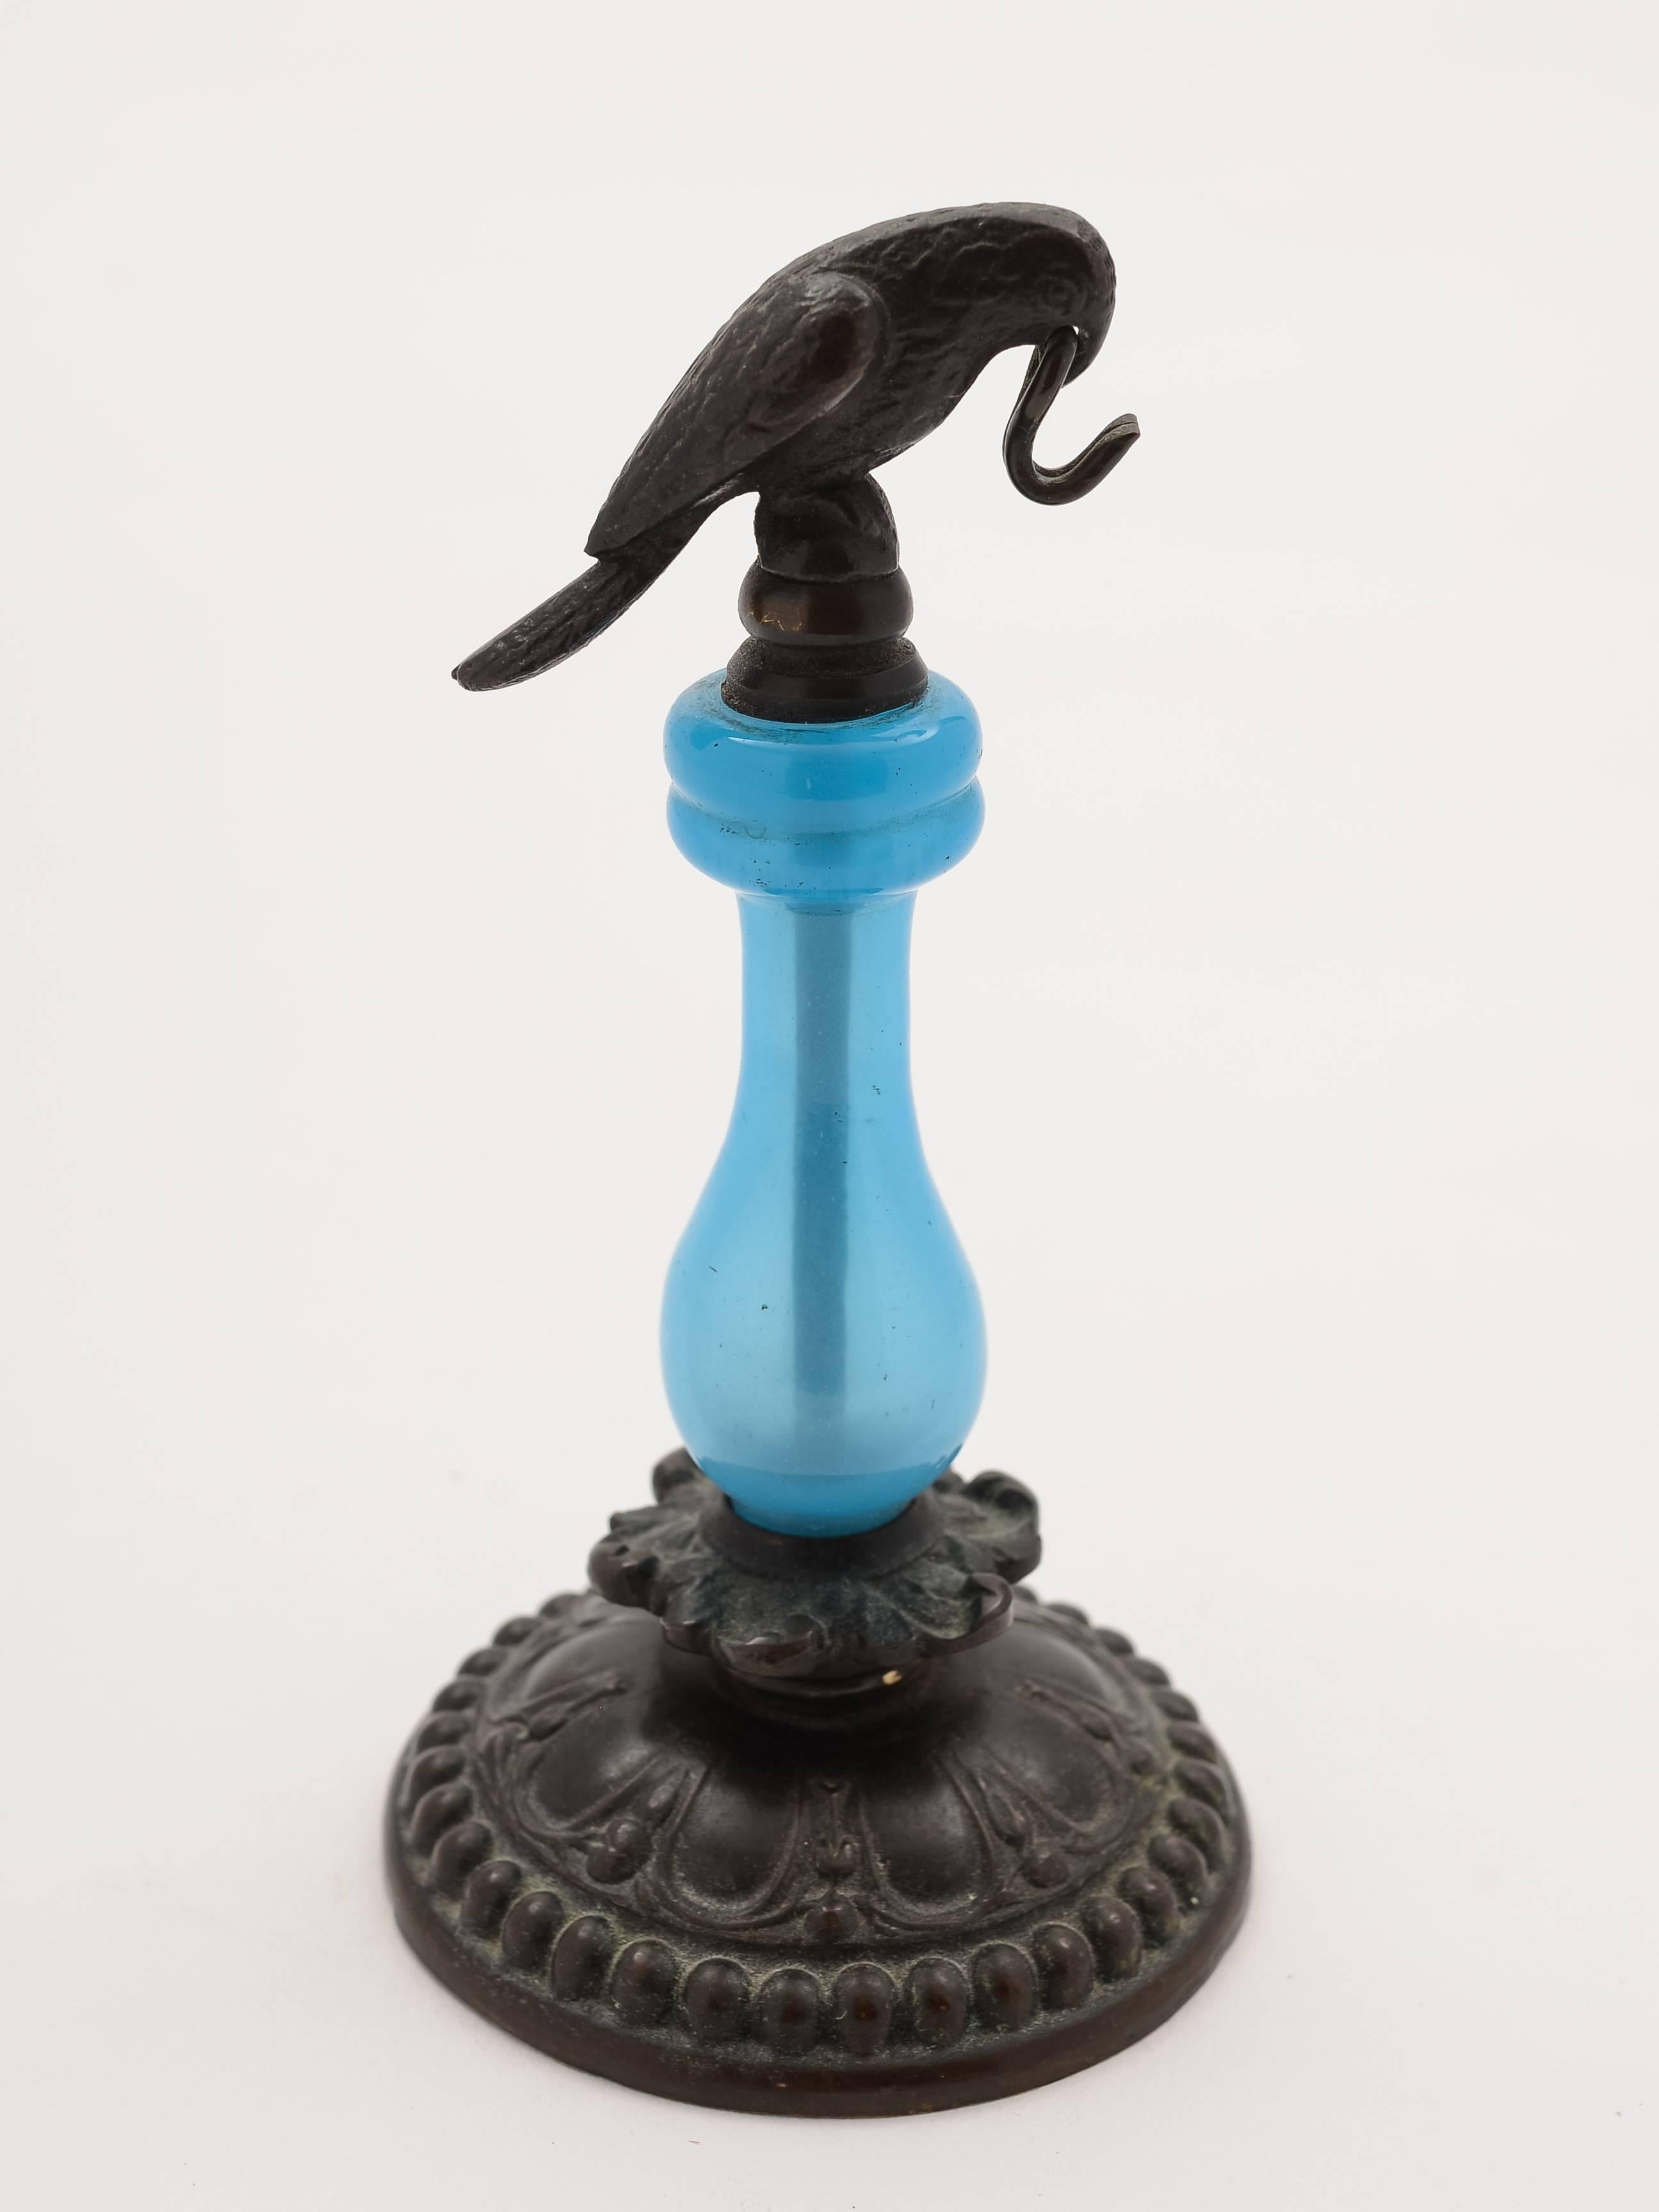 A nice novelty brass watch stand (probably French) with blue opaque glass column to centre with bird perched on top with hook for hanging watch from, circa 1880.

Total weight: 178g

These often would have been kept by the bedside to hang your